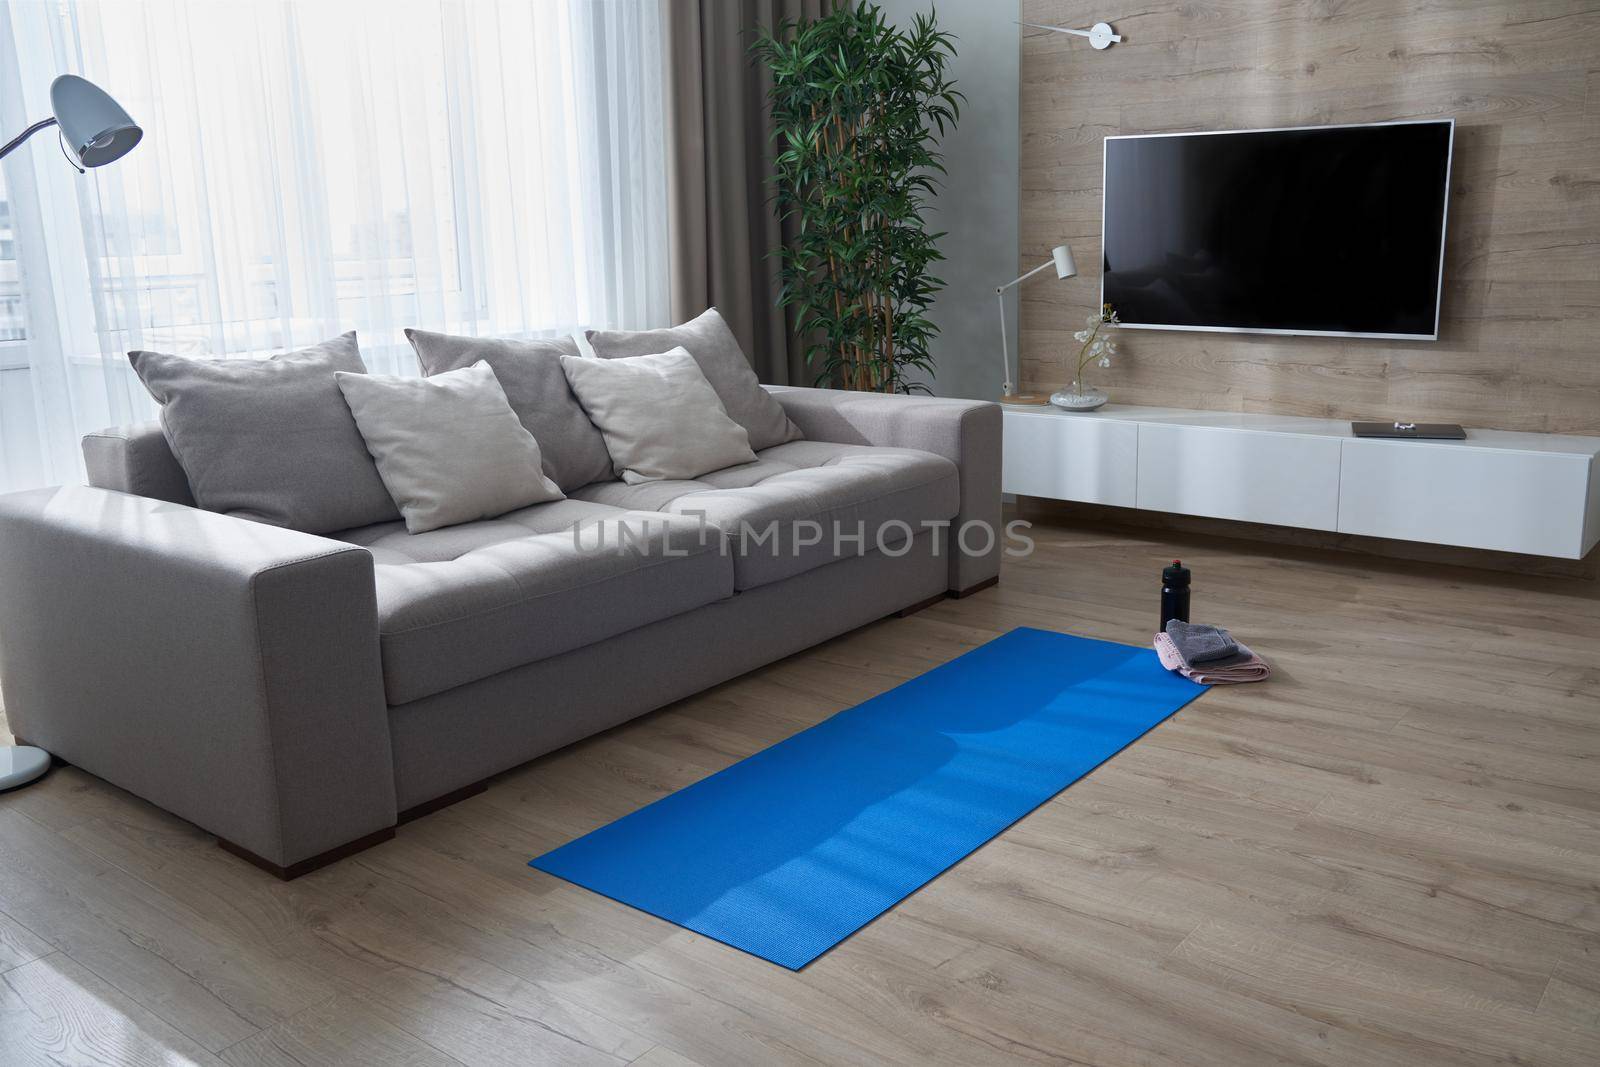 Yoga mat on the floor in modern living room with no people. Healthy lifestyle and fitness concept